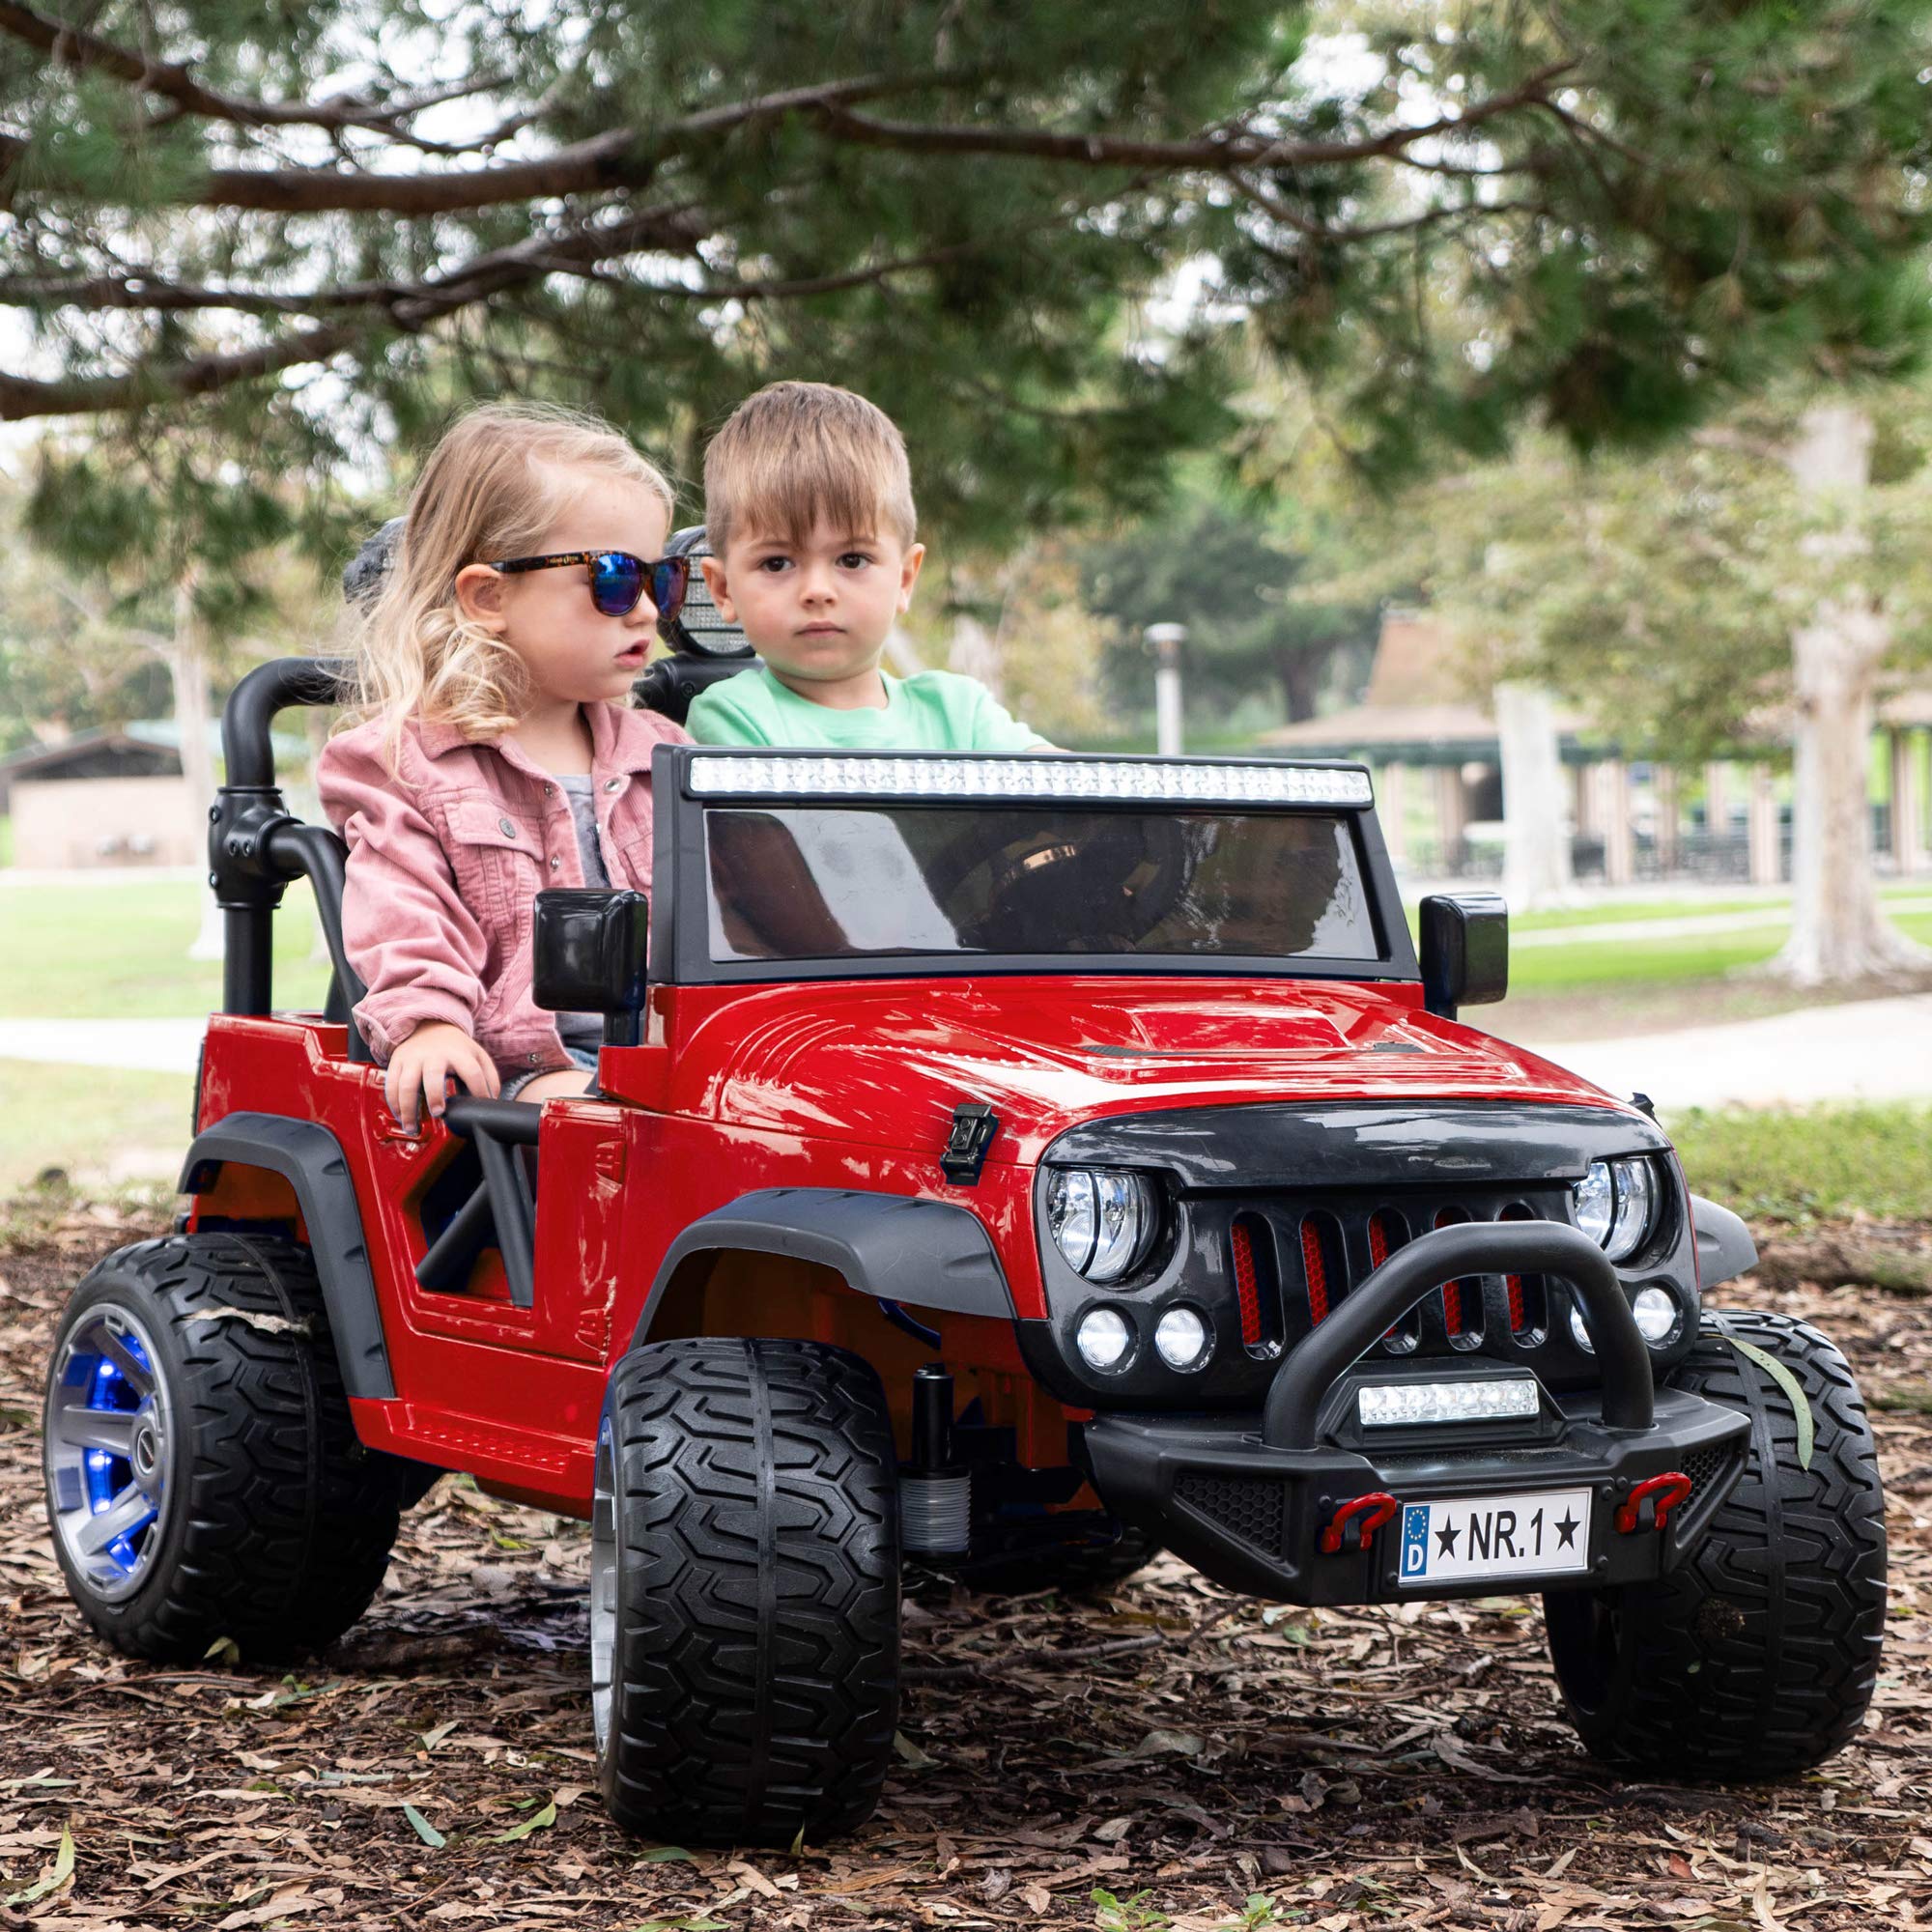 2023 Two (2) Seater Ride On Kids Car Truck w/Battery Swaps 12V Kid Car to Drive 3 Speeds, Leather Seat, Remote, MP3 Music by Bluetooth, FM Radio, Rubber Tires